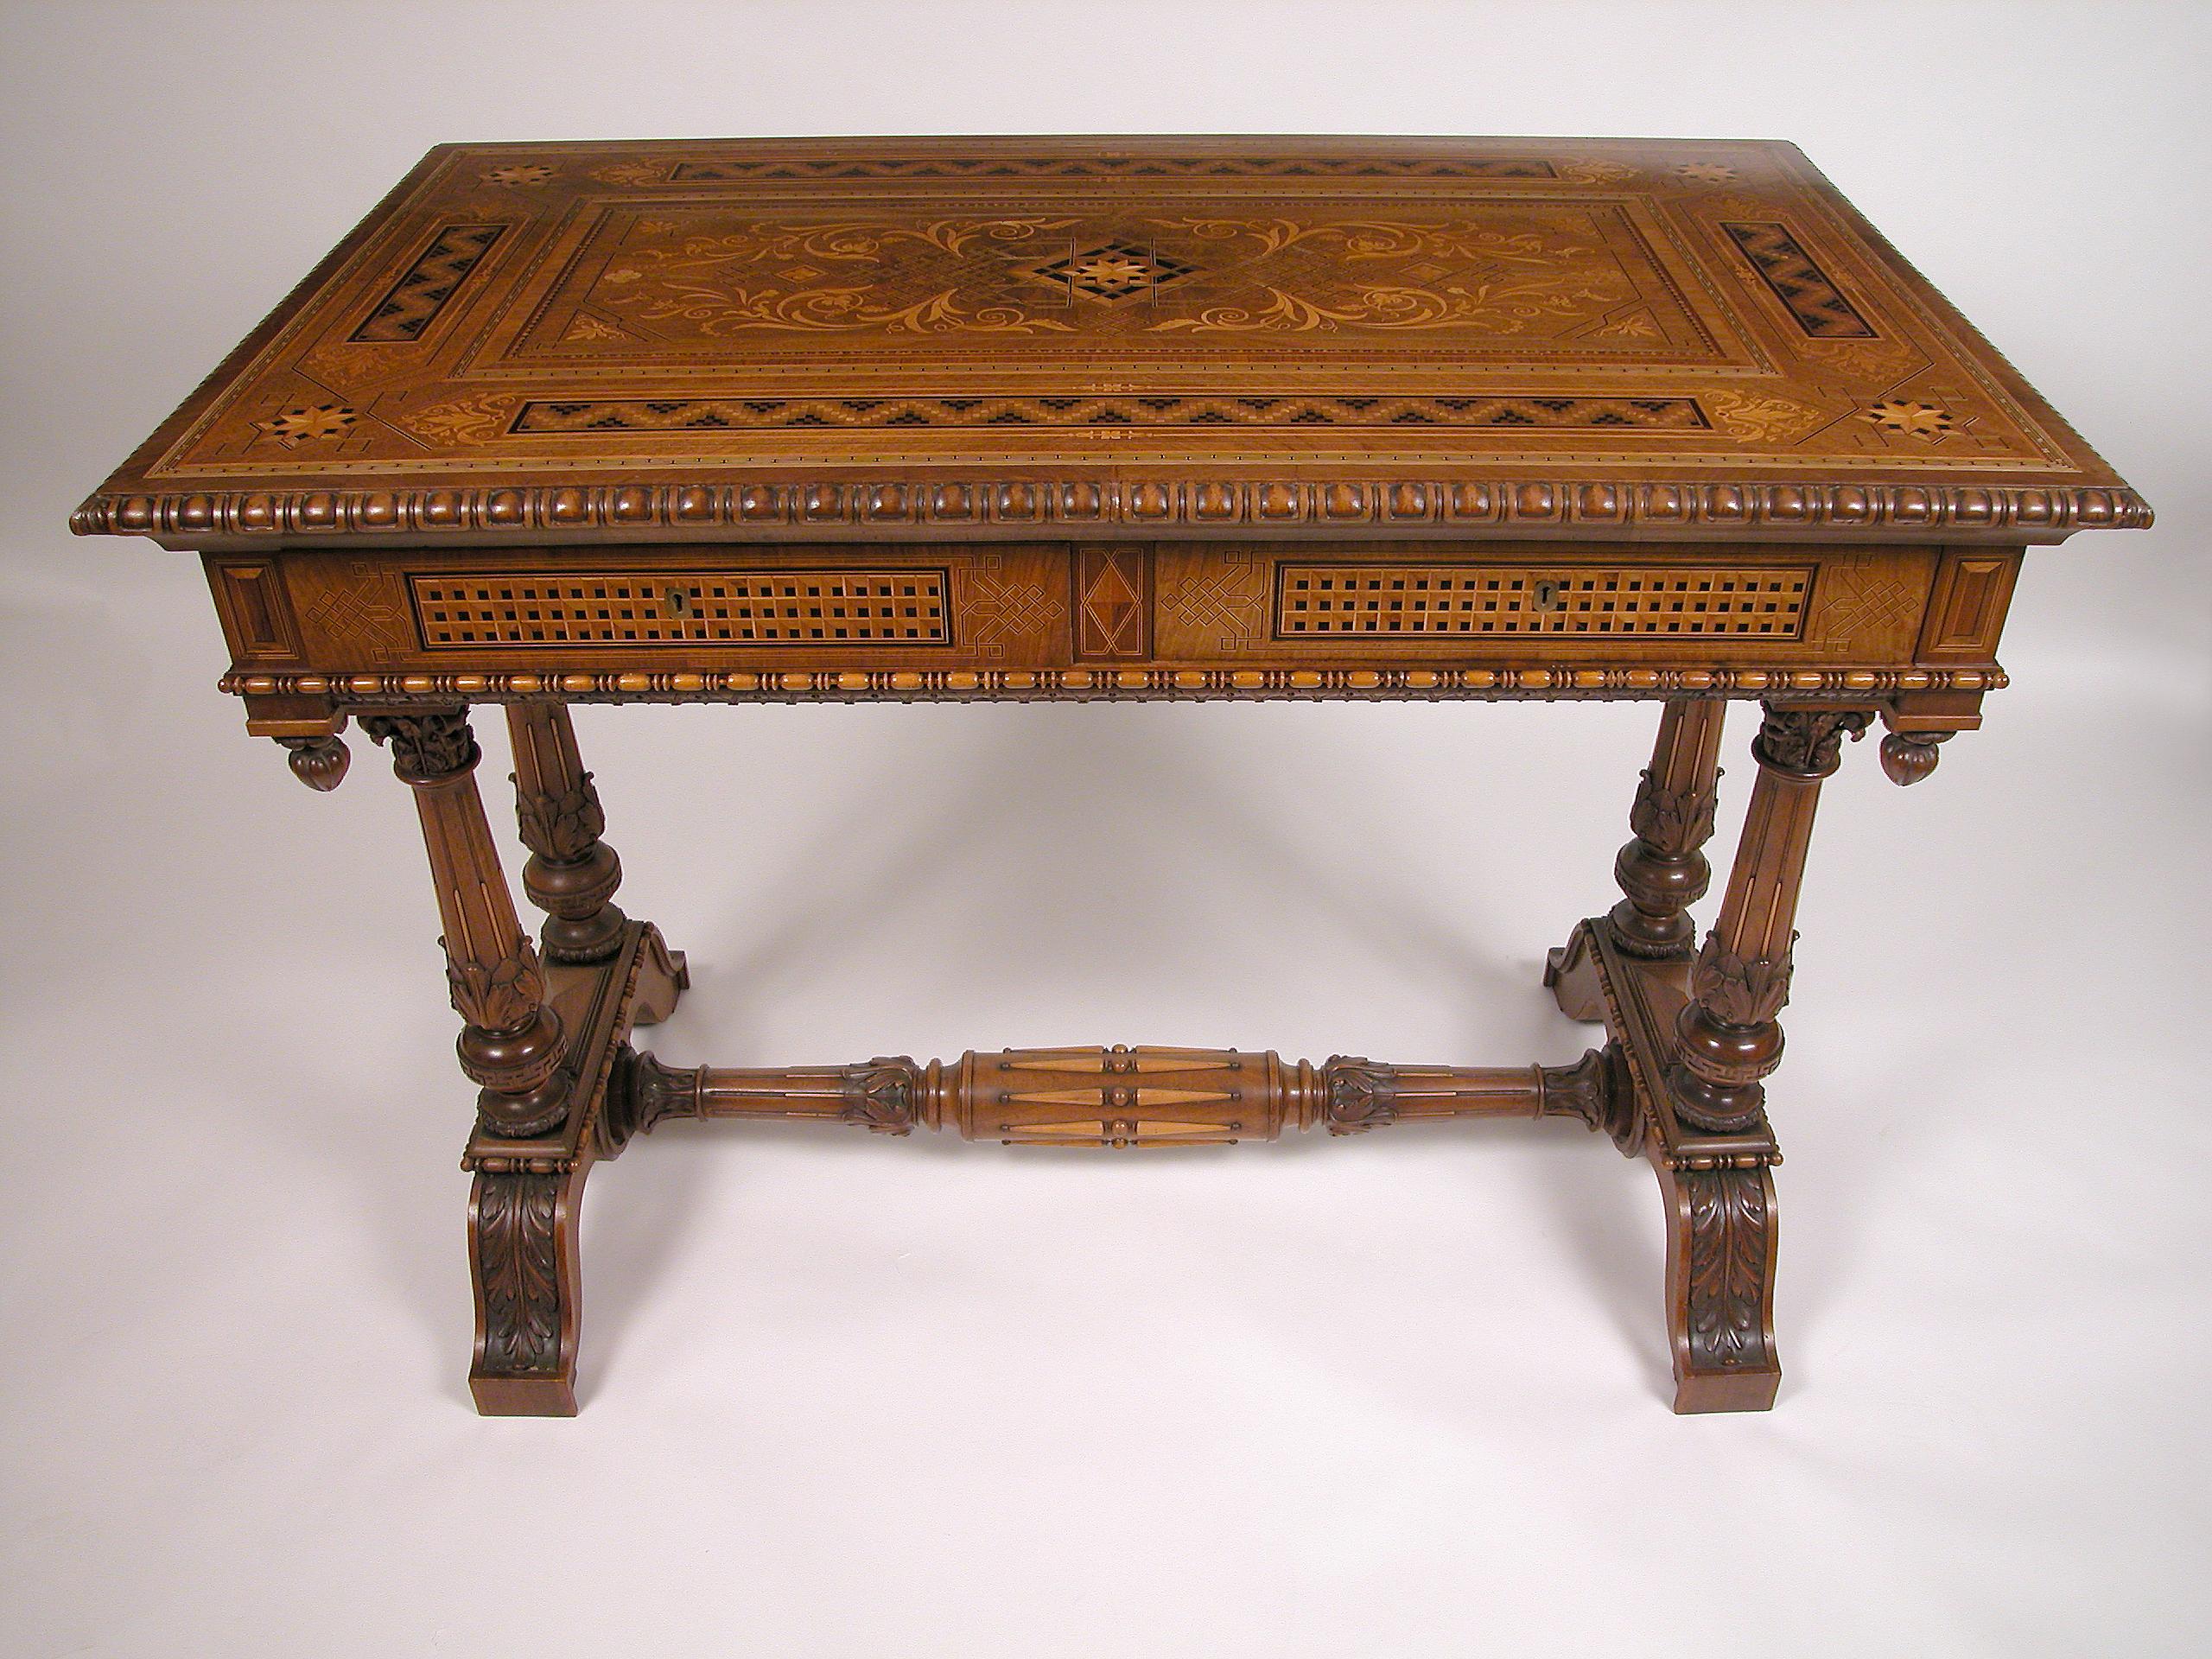 Label mentioning “I.R. Scuola, Sezione Intarsio e Intaglio, Cortina d’Ampezzo, n°146”

Exceptional Venetian Renaissance style center table. The top and the frieze opening with four drawers are fully ornamented with a flat carved decoration and a